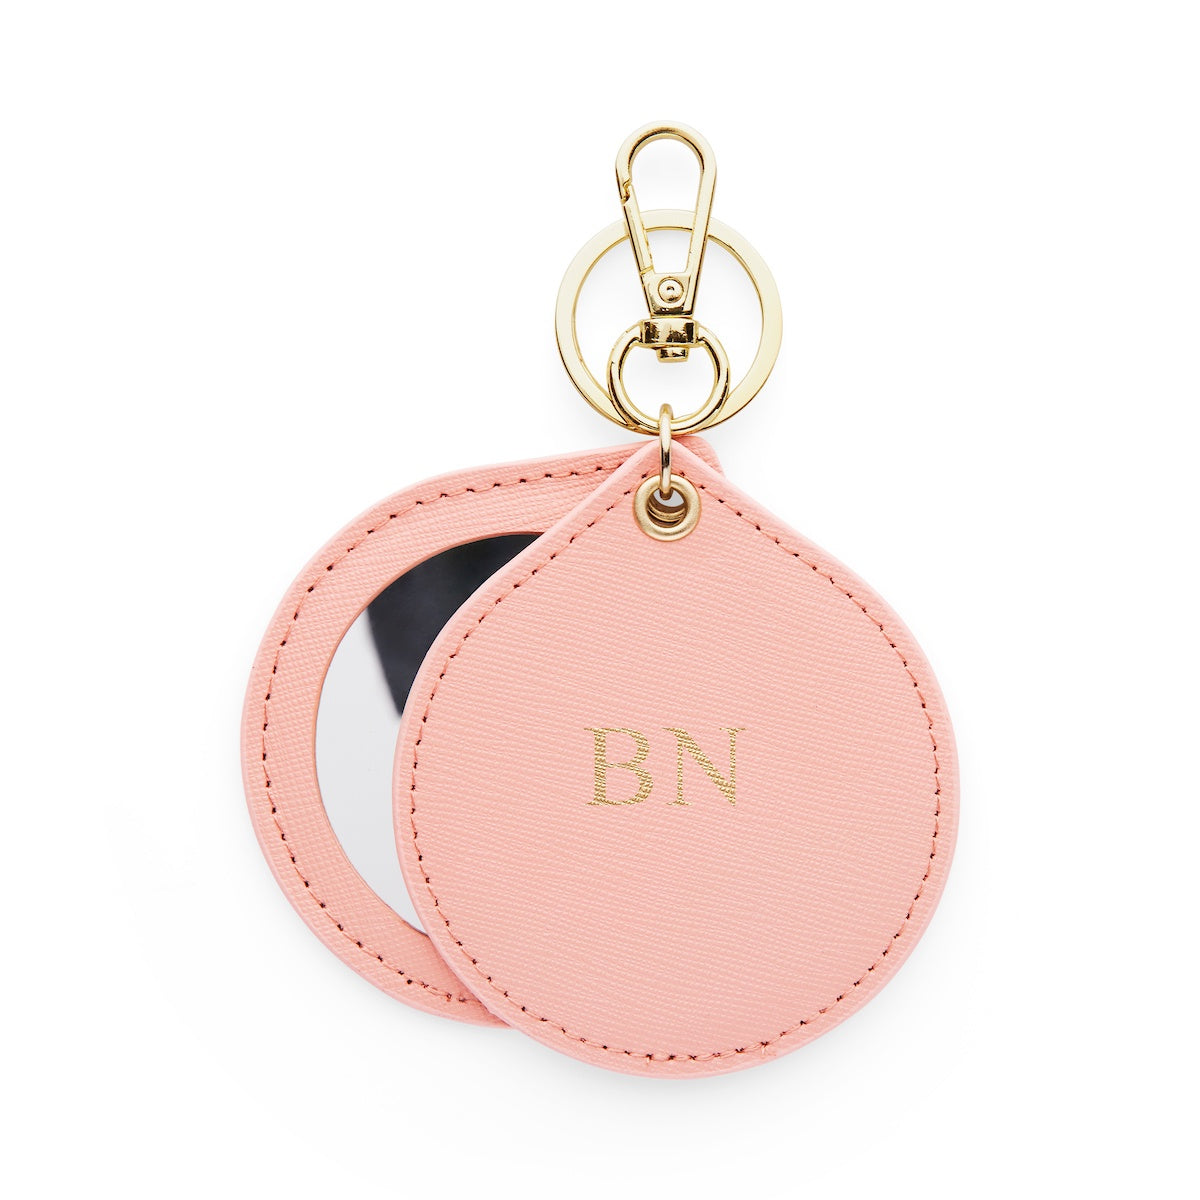 Compact Mirror - Pink Saffiano Leather